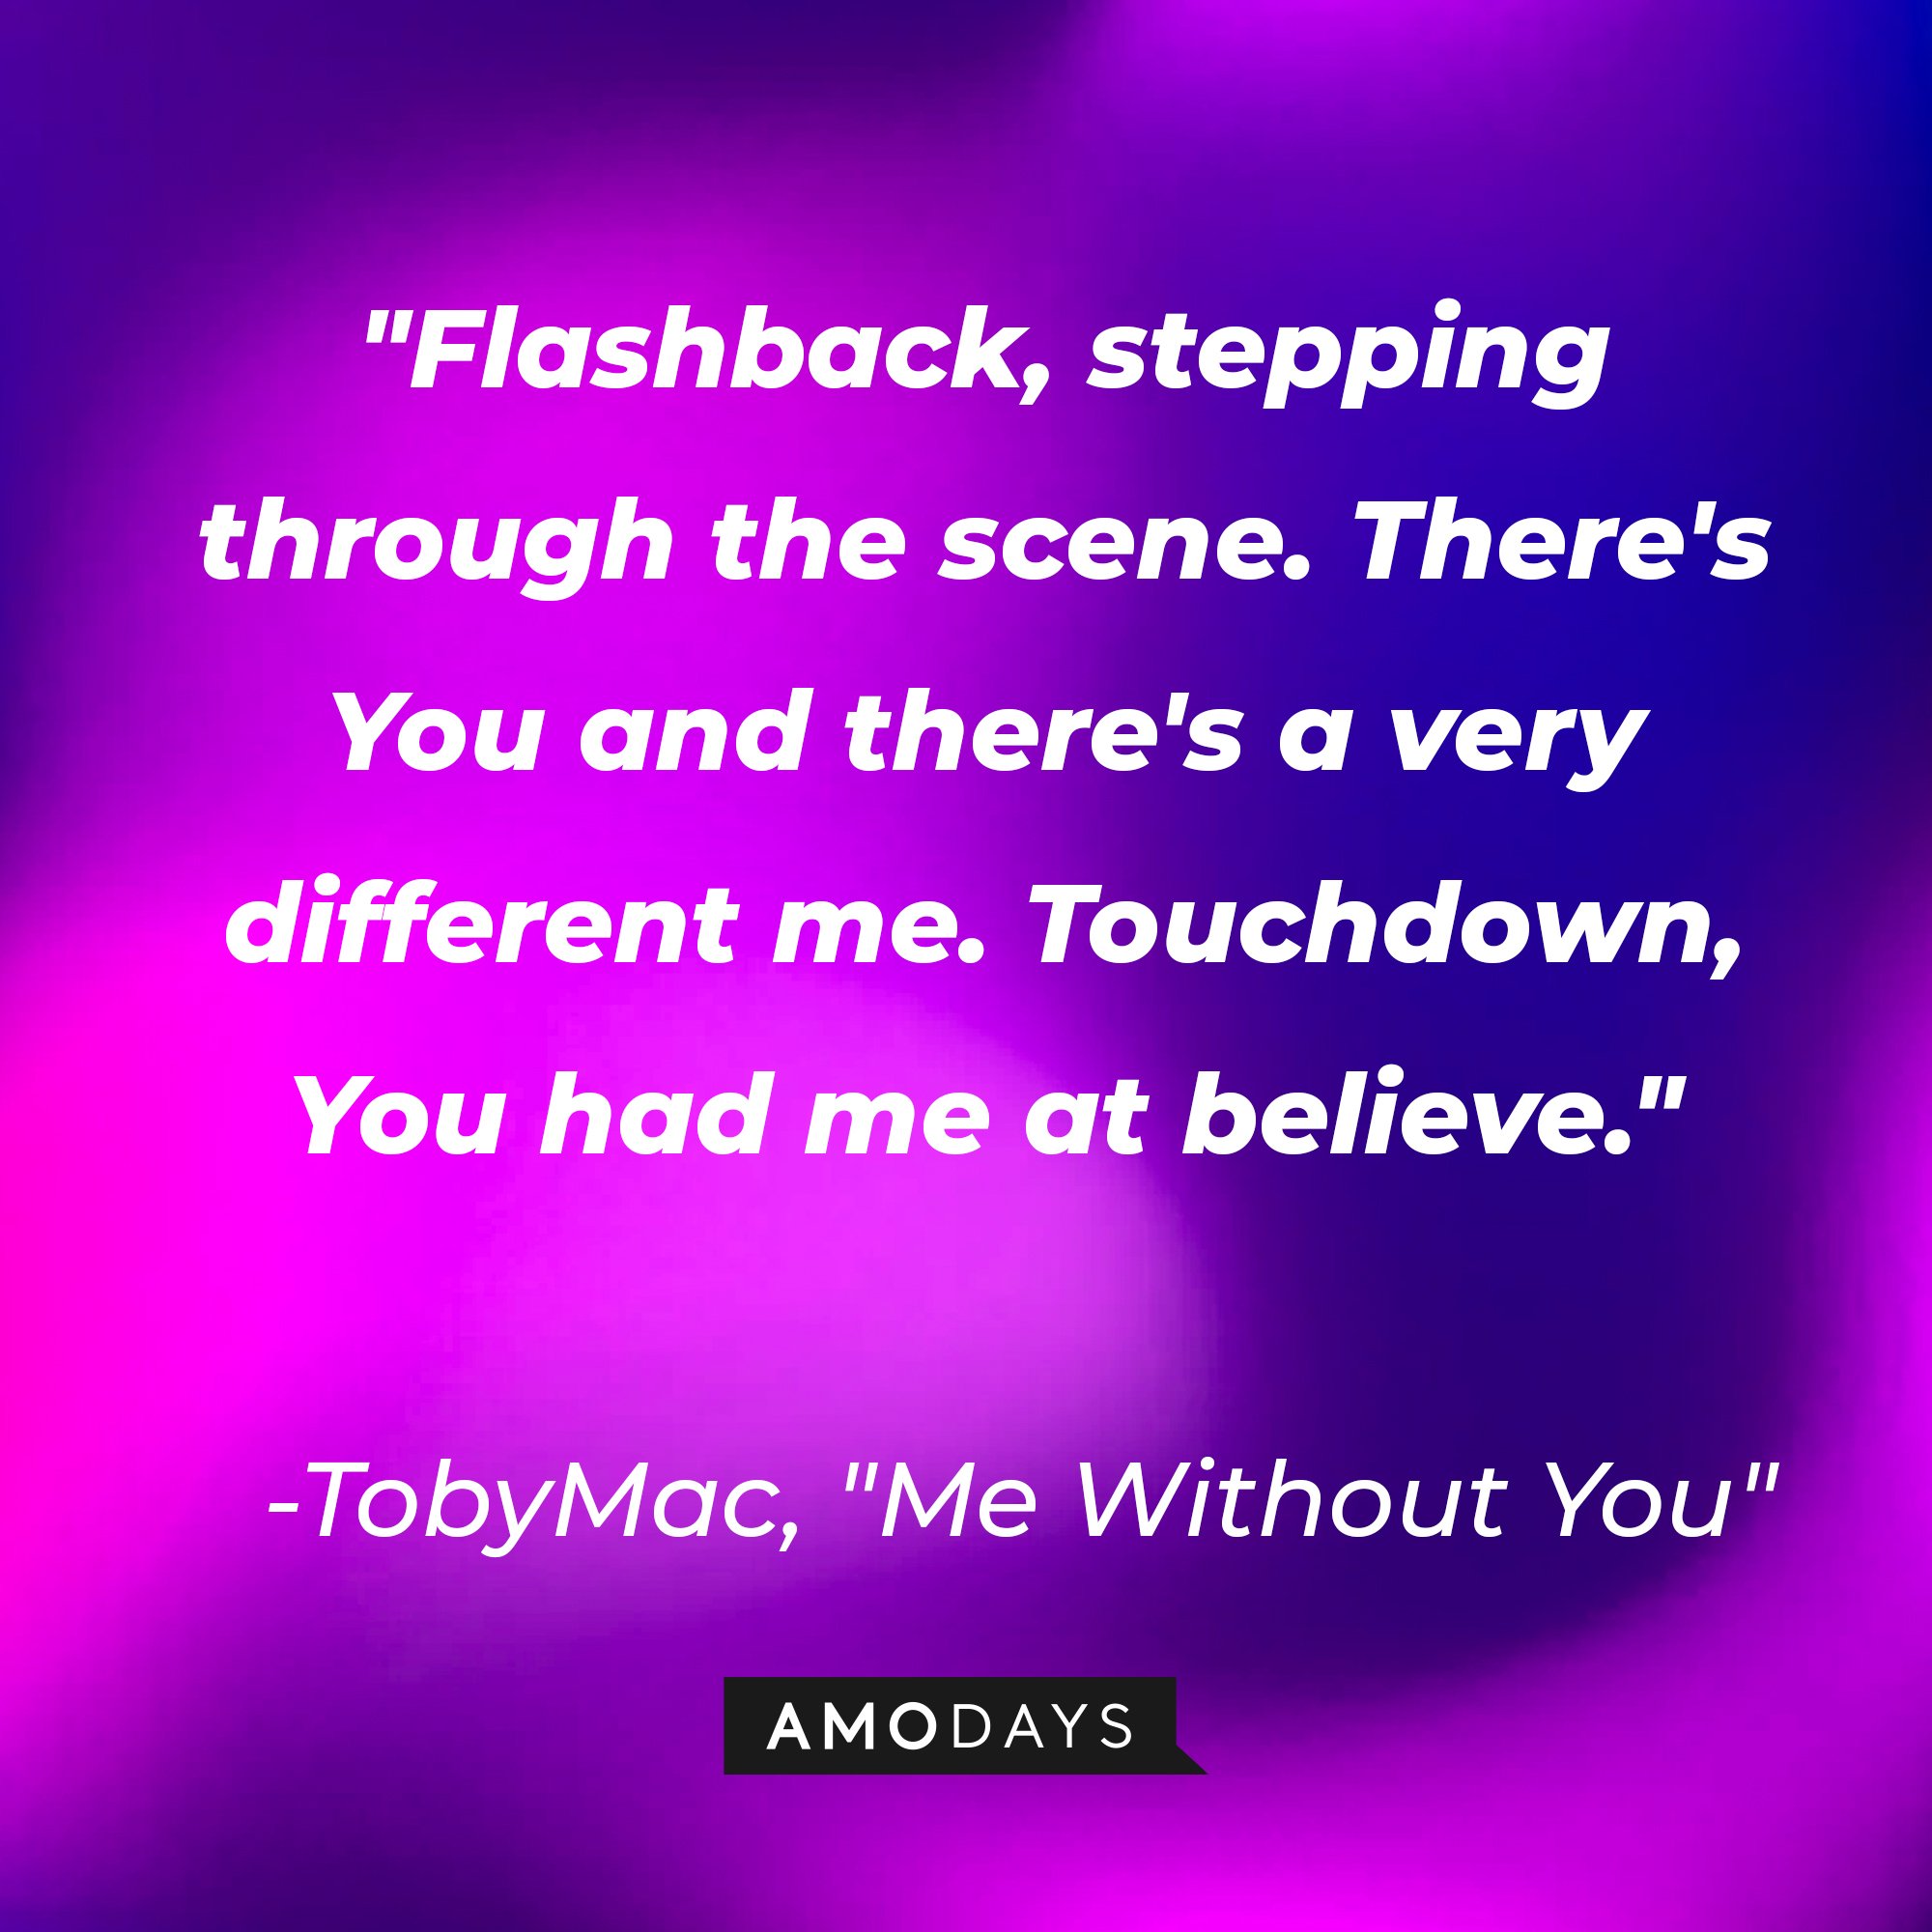 TobyMac's "Me Without You" quote: "Flashback, stepping through the scene. There's You and there's a very different me. Touchdown, You had me at believe." | Image: AmoDays